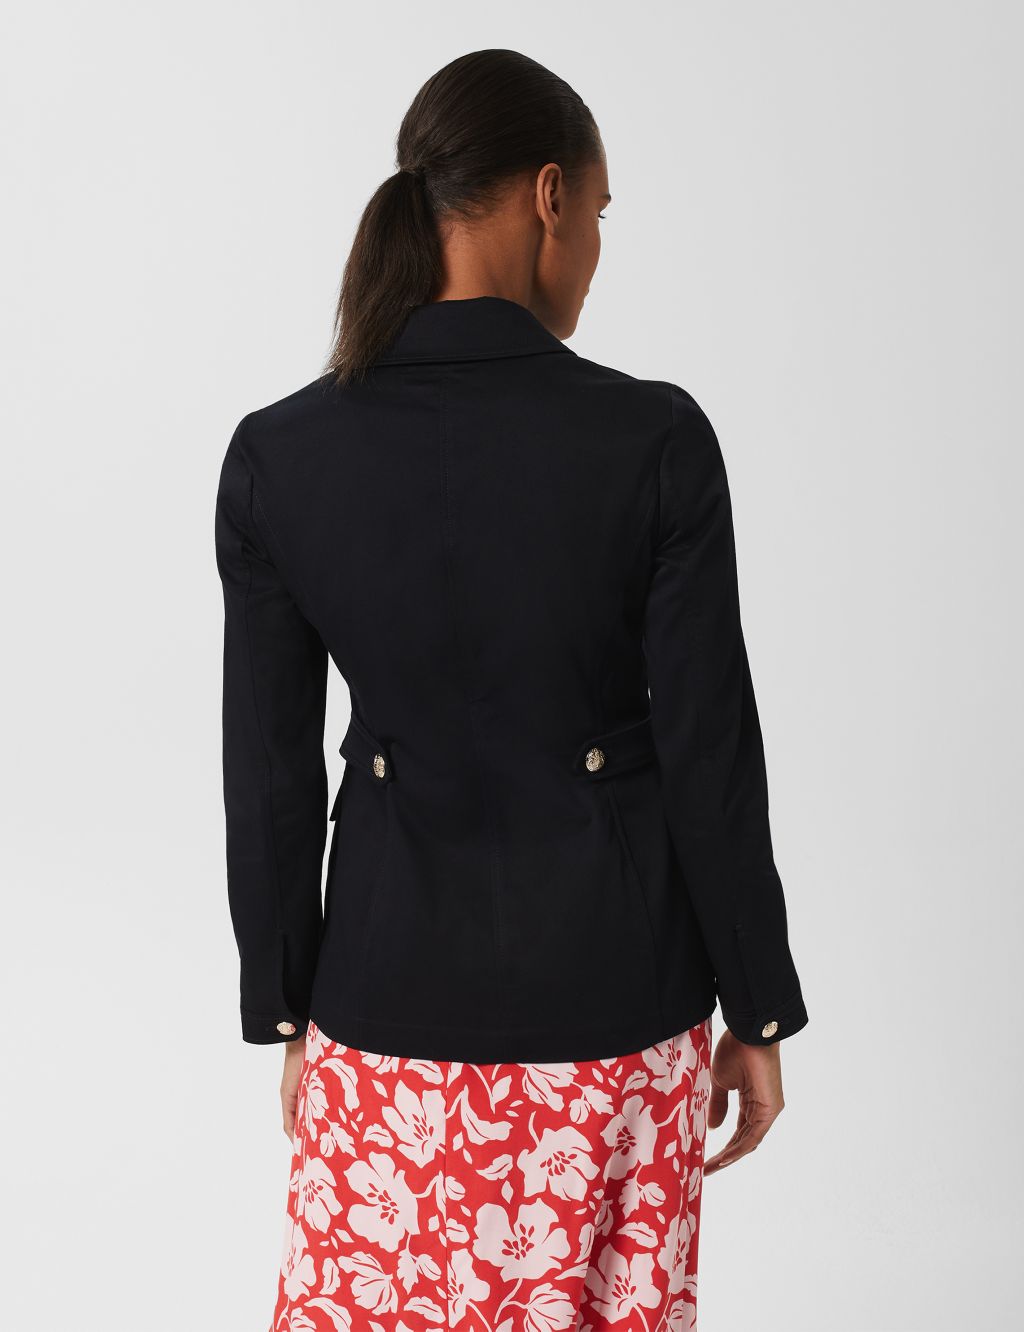 Cotton Rich Collared Jacket image 4